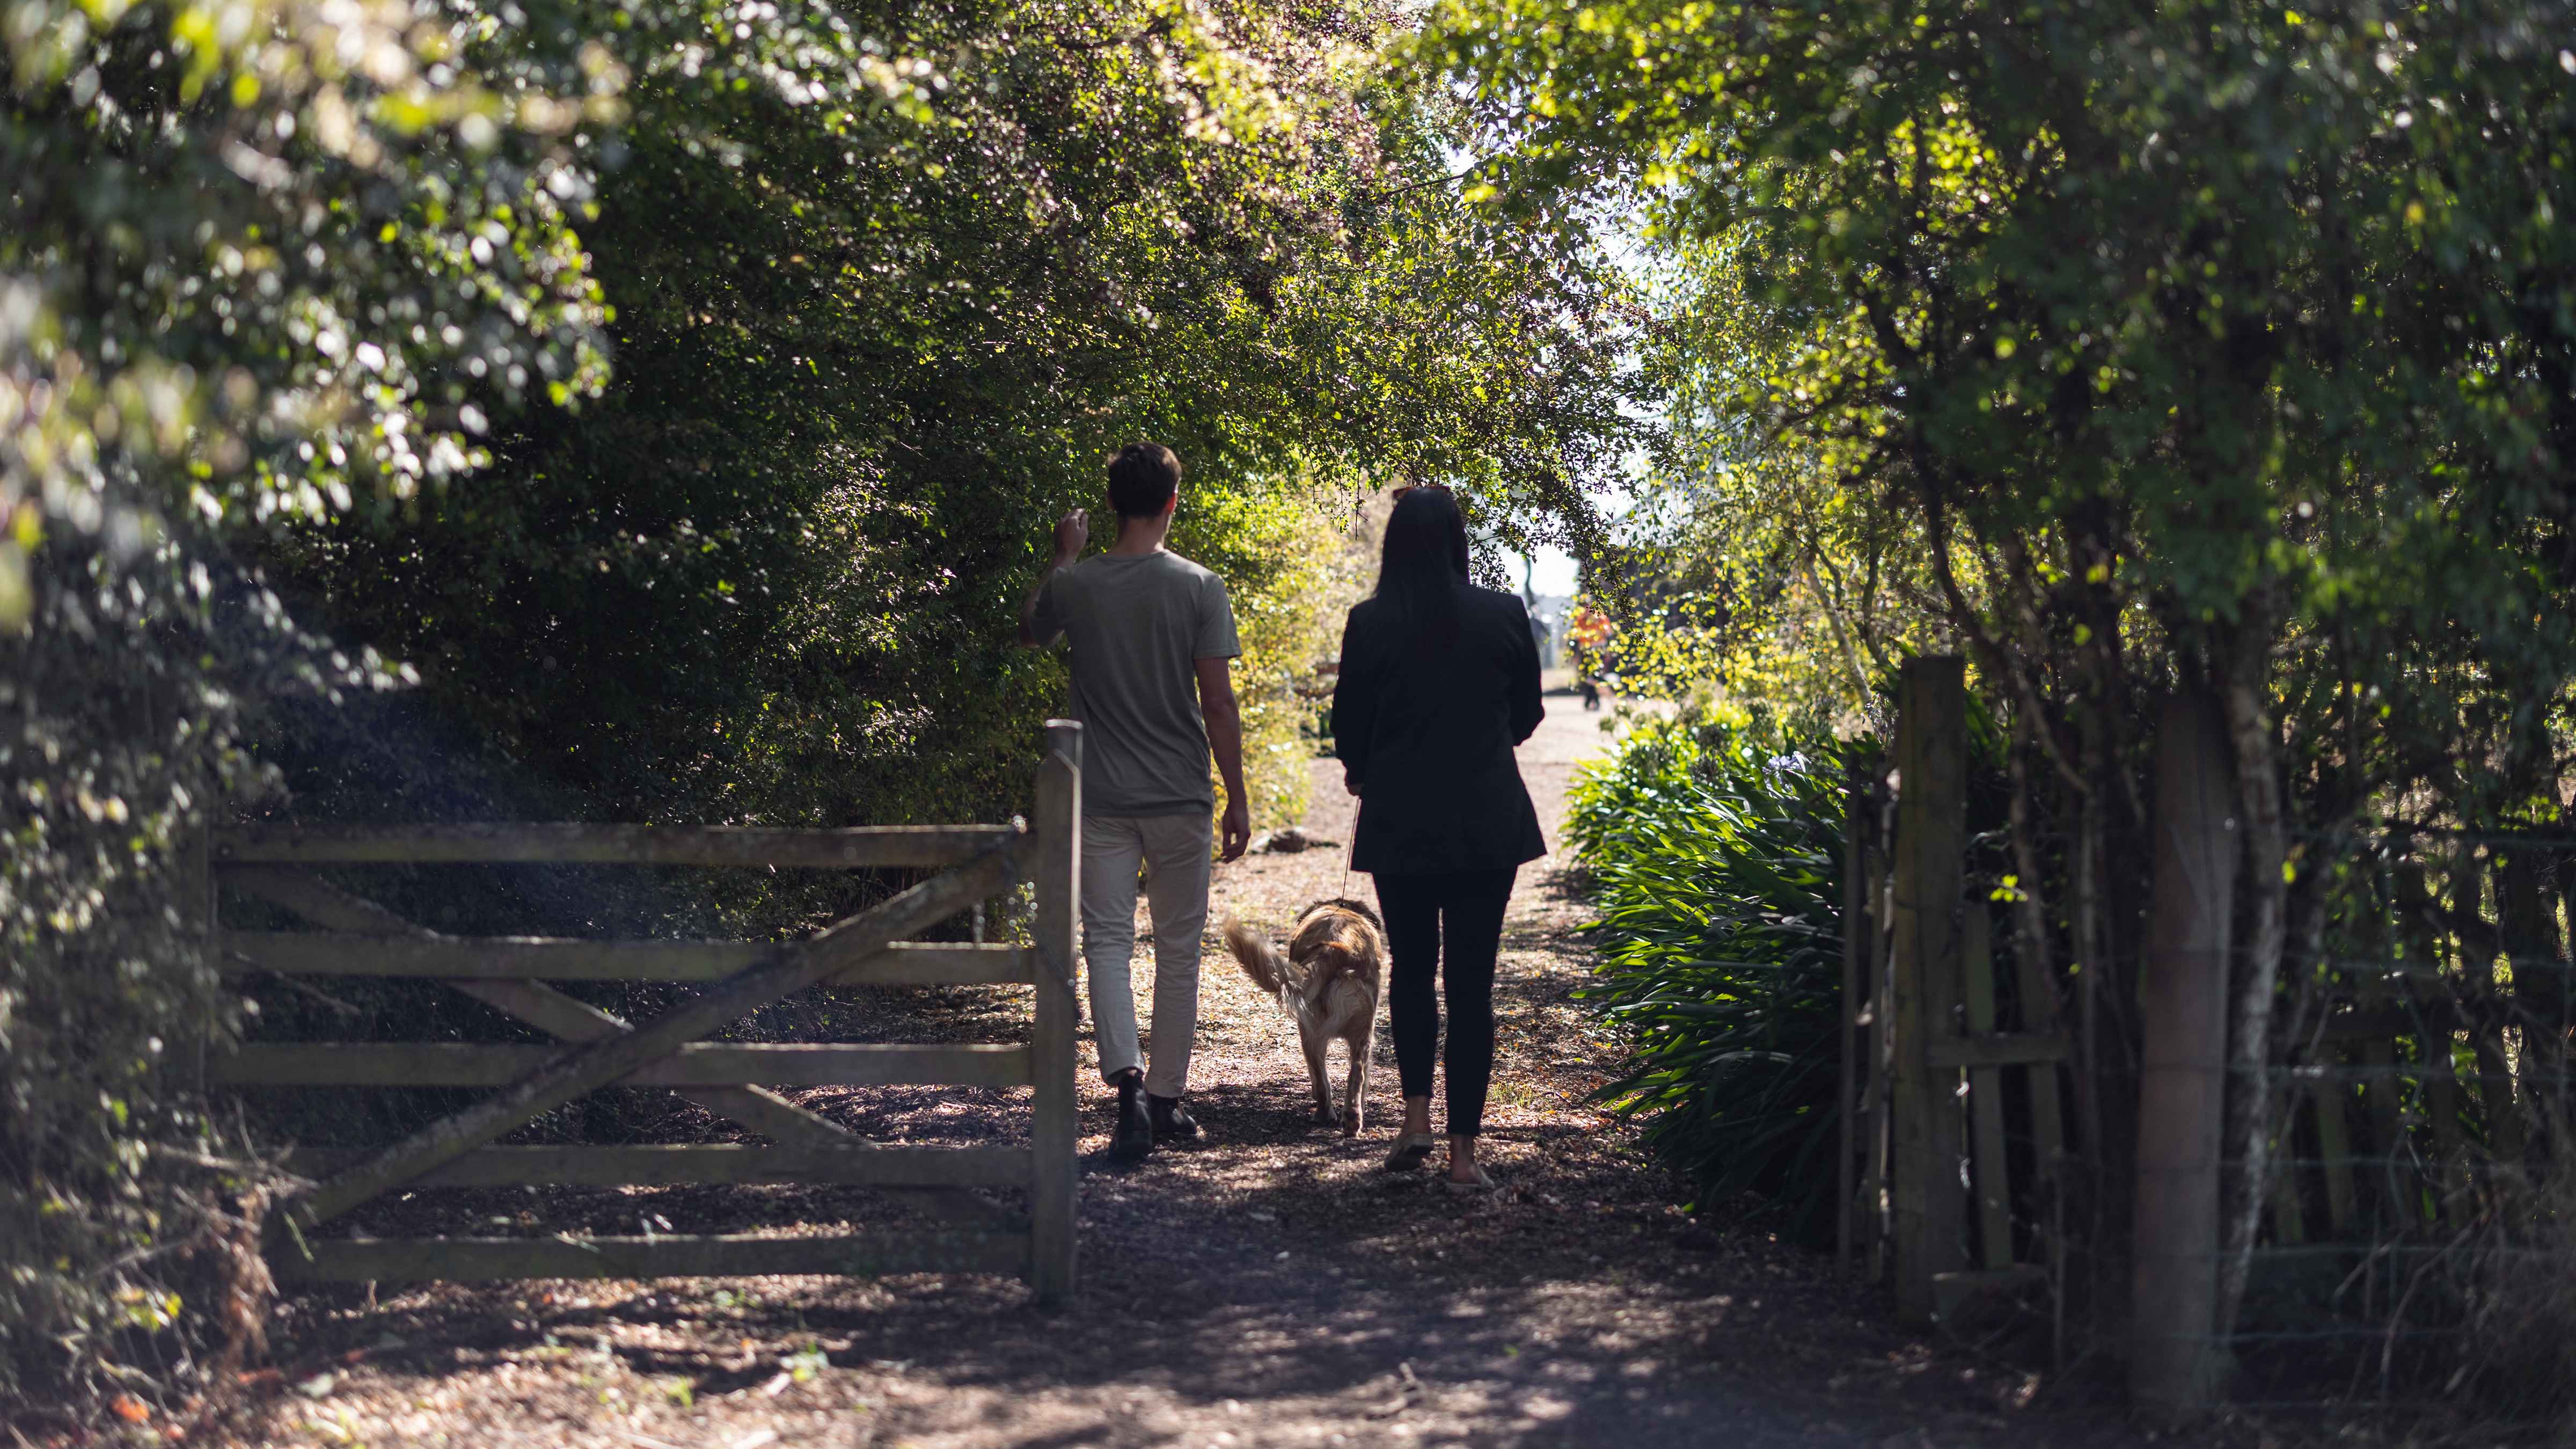 Two people and a dog walk along a laneway through a wooden gate that is flanked by hawthorn hedges. The hedges have just come into flower and have green leaves. Photo: Kate von Stieglitz / Tourism Australia.